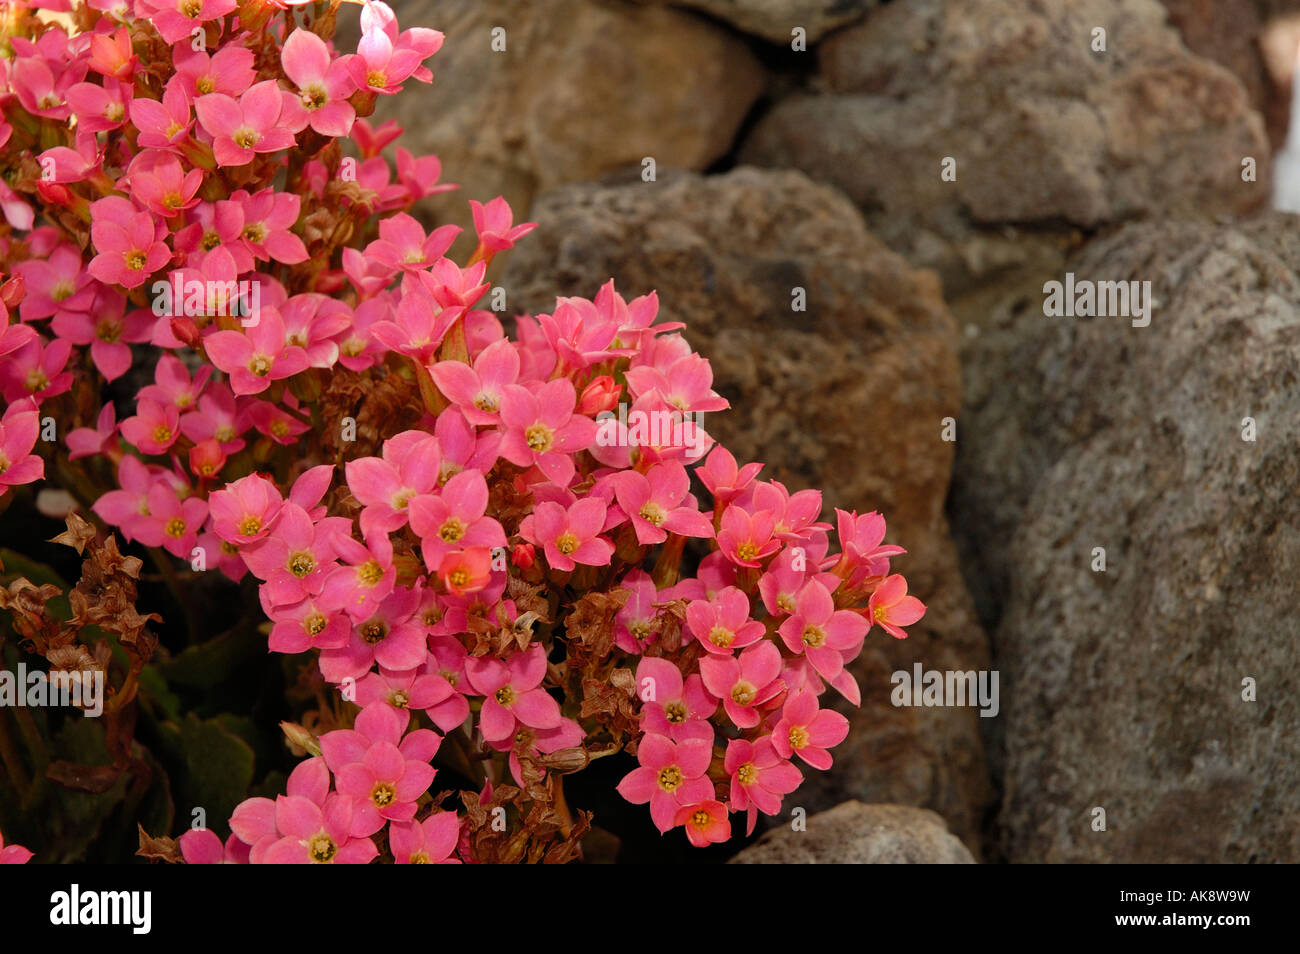 The pink flowers of Saxifraga Stock Photo